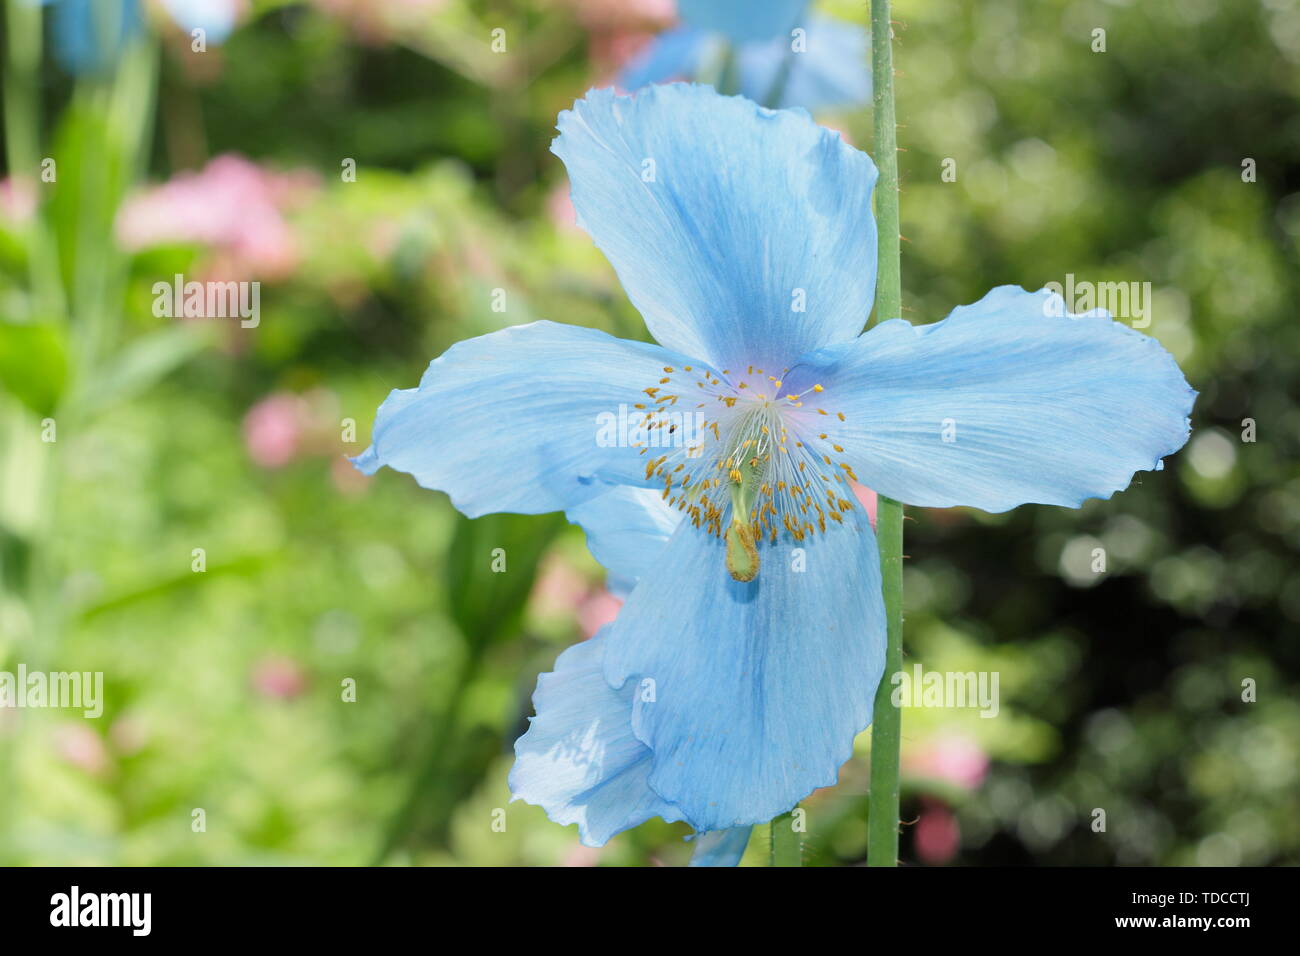 Mevconopsis 'Lingholm'. Himalayan blue poppies flowering in May in a woodland garden, UK Stock Photo